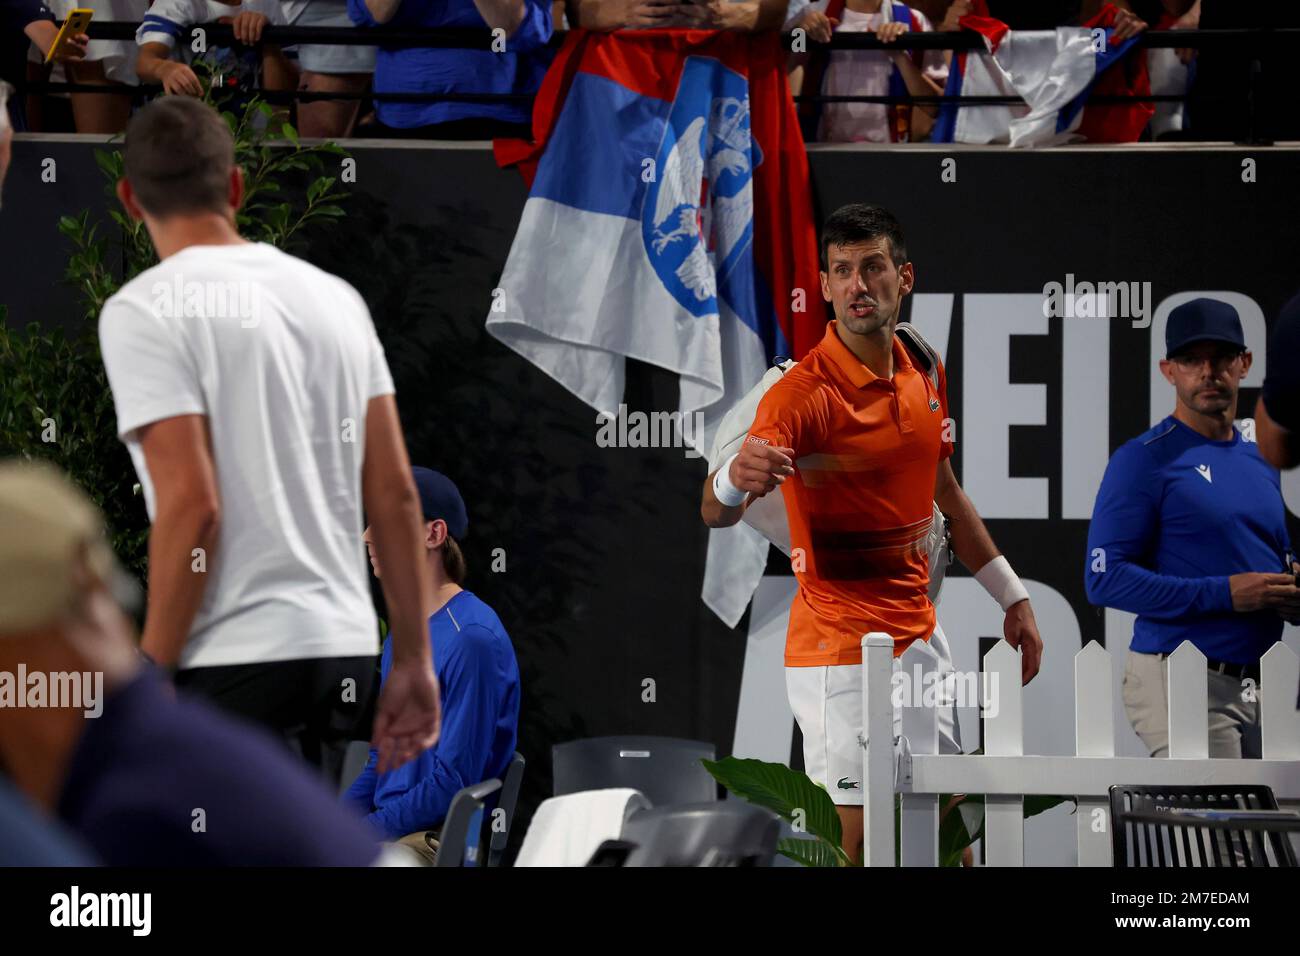 Serbias Novak Djokovic speaks to his coaches as he heads to the locker room after winning the 2nd set against USAs Sebastian Korda during the final of the Adelaide International tennis tournament